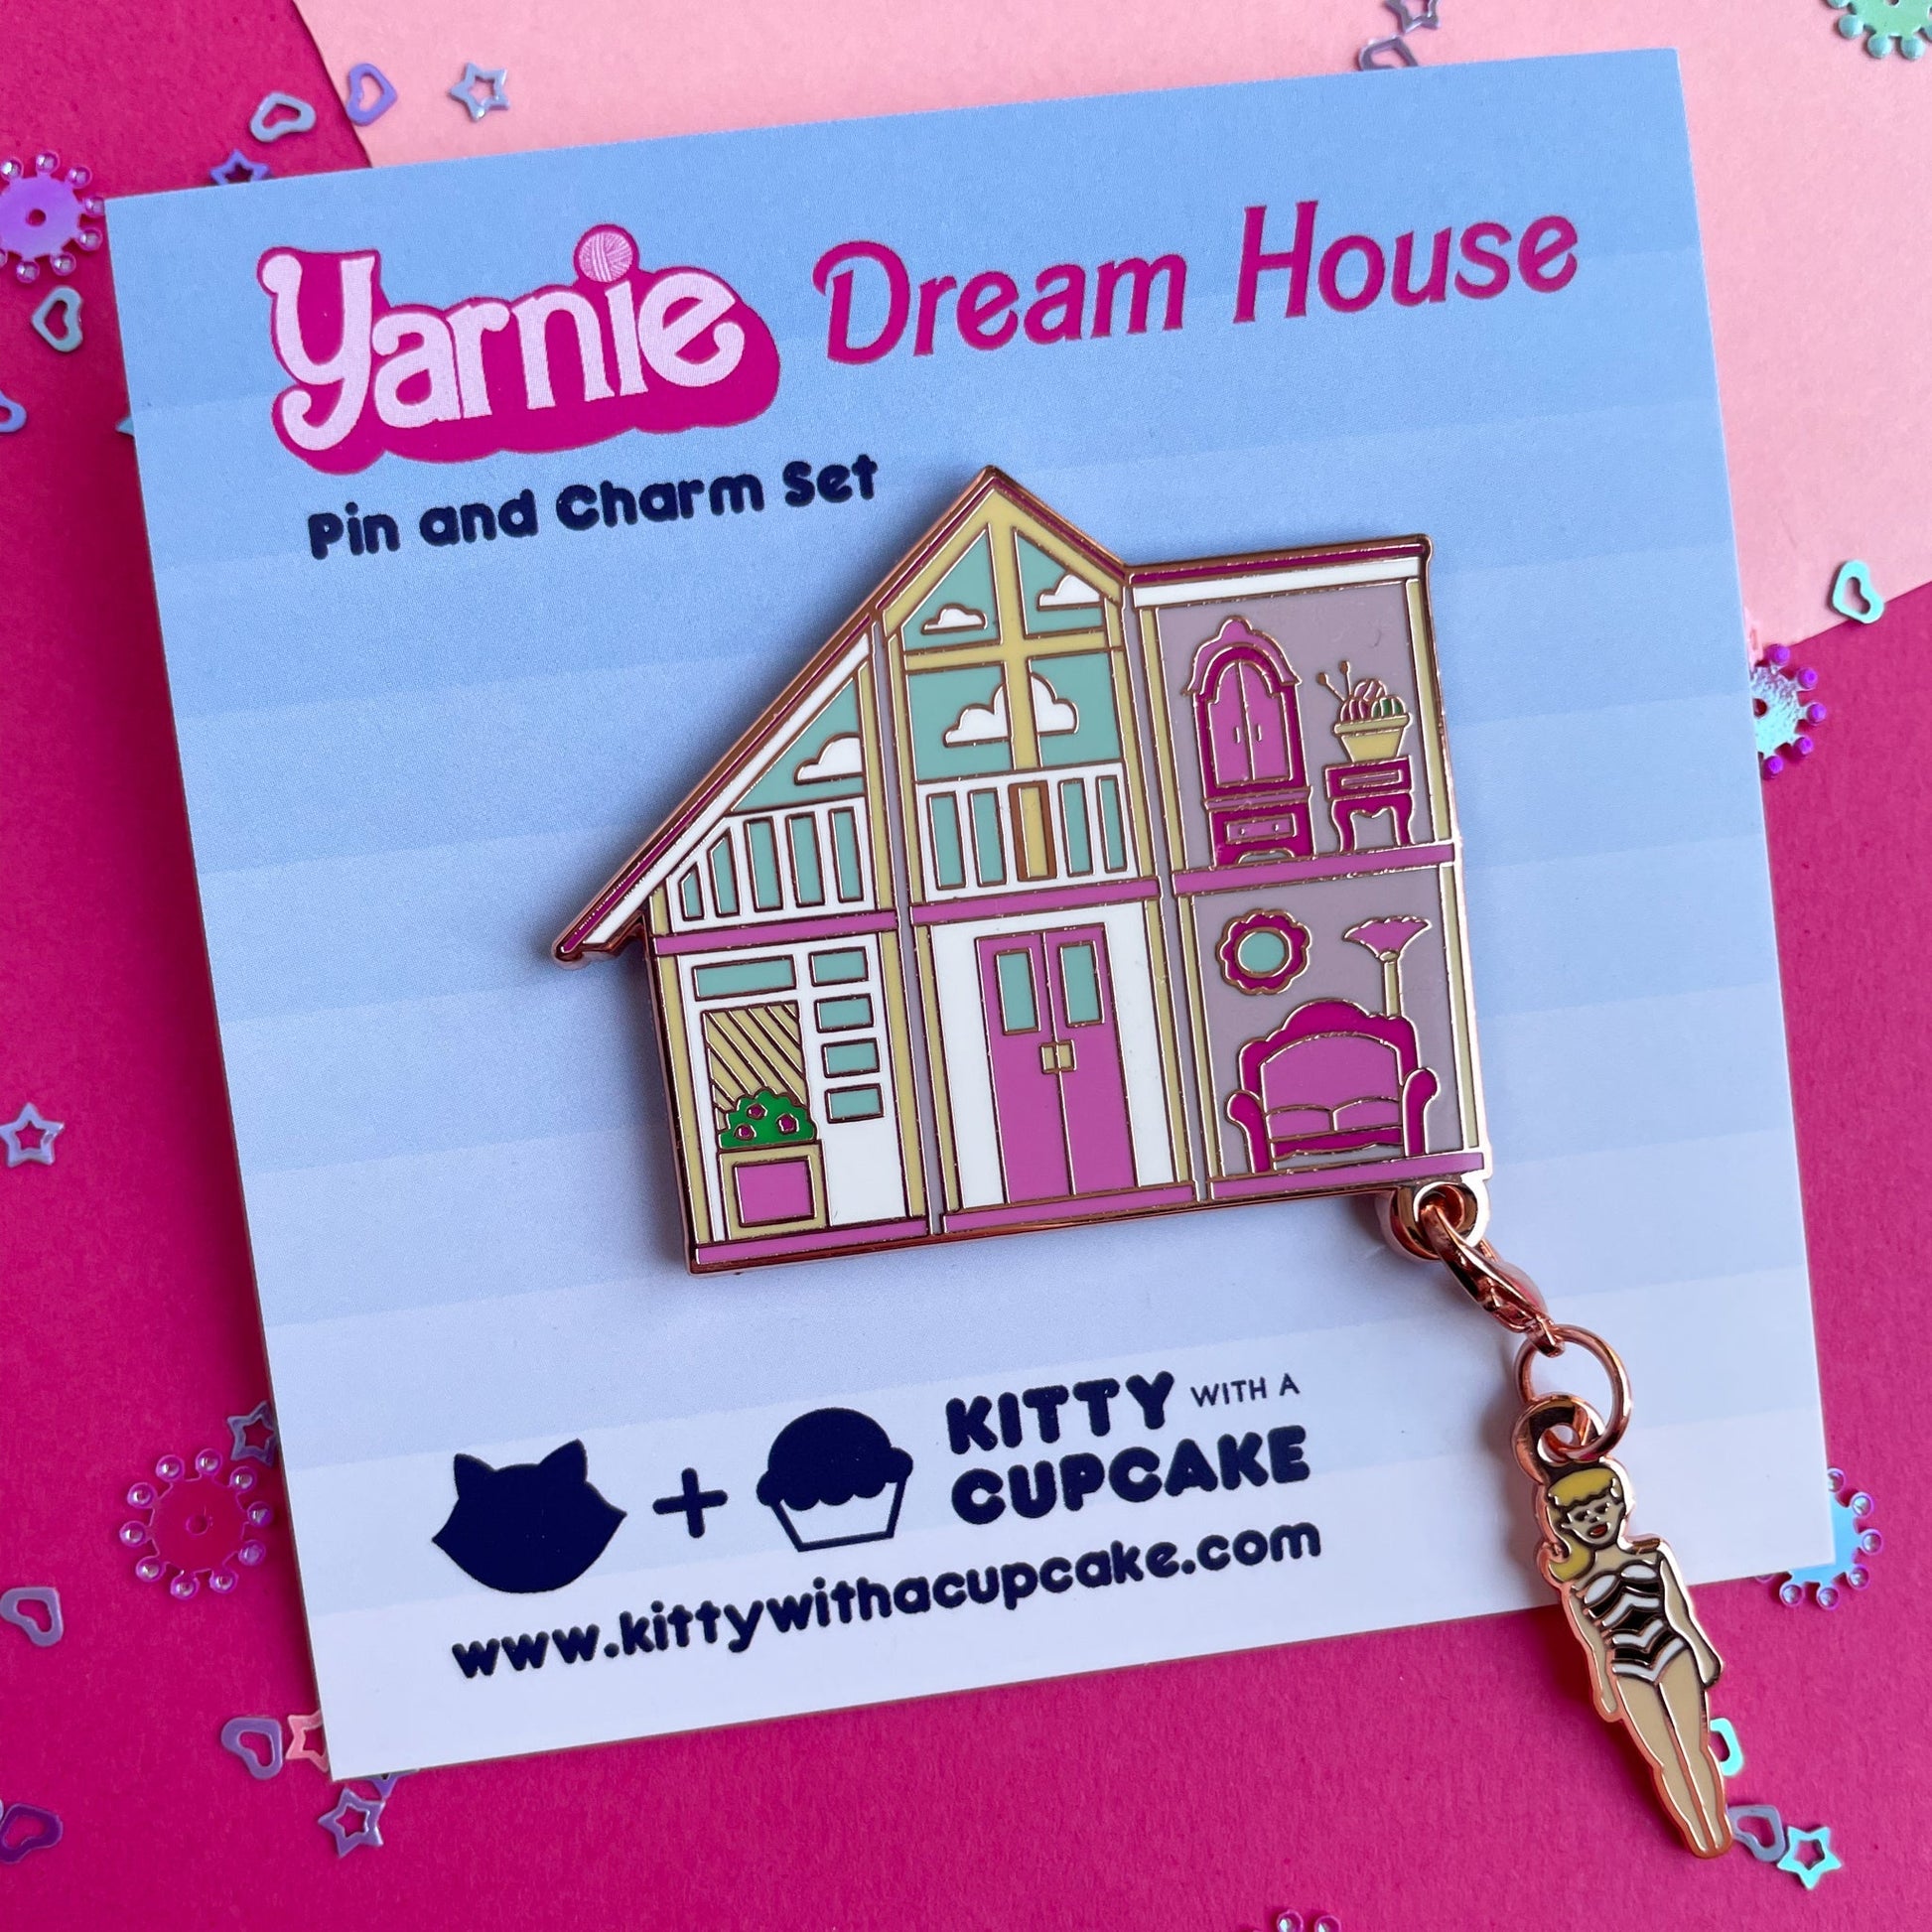 An enamel pin of a pink doll house with a Barbie shaped charm hanging from the corner on a blue backing card that reads "Yarnie Dream House"